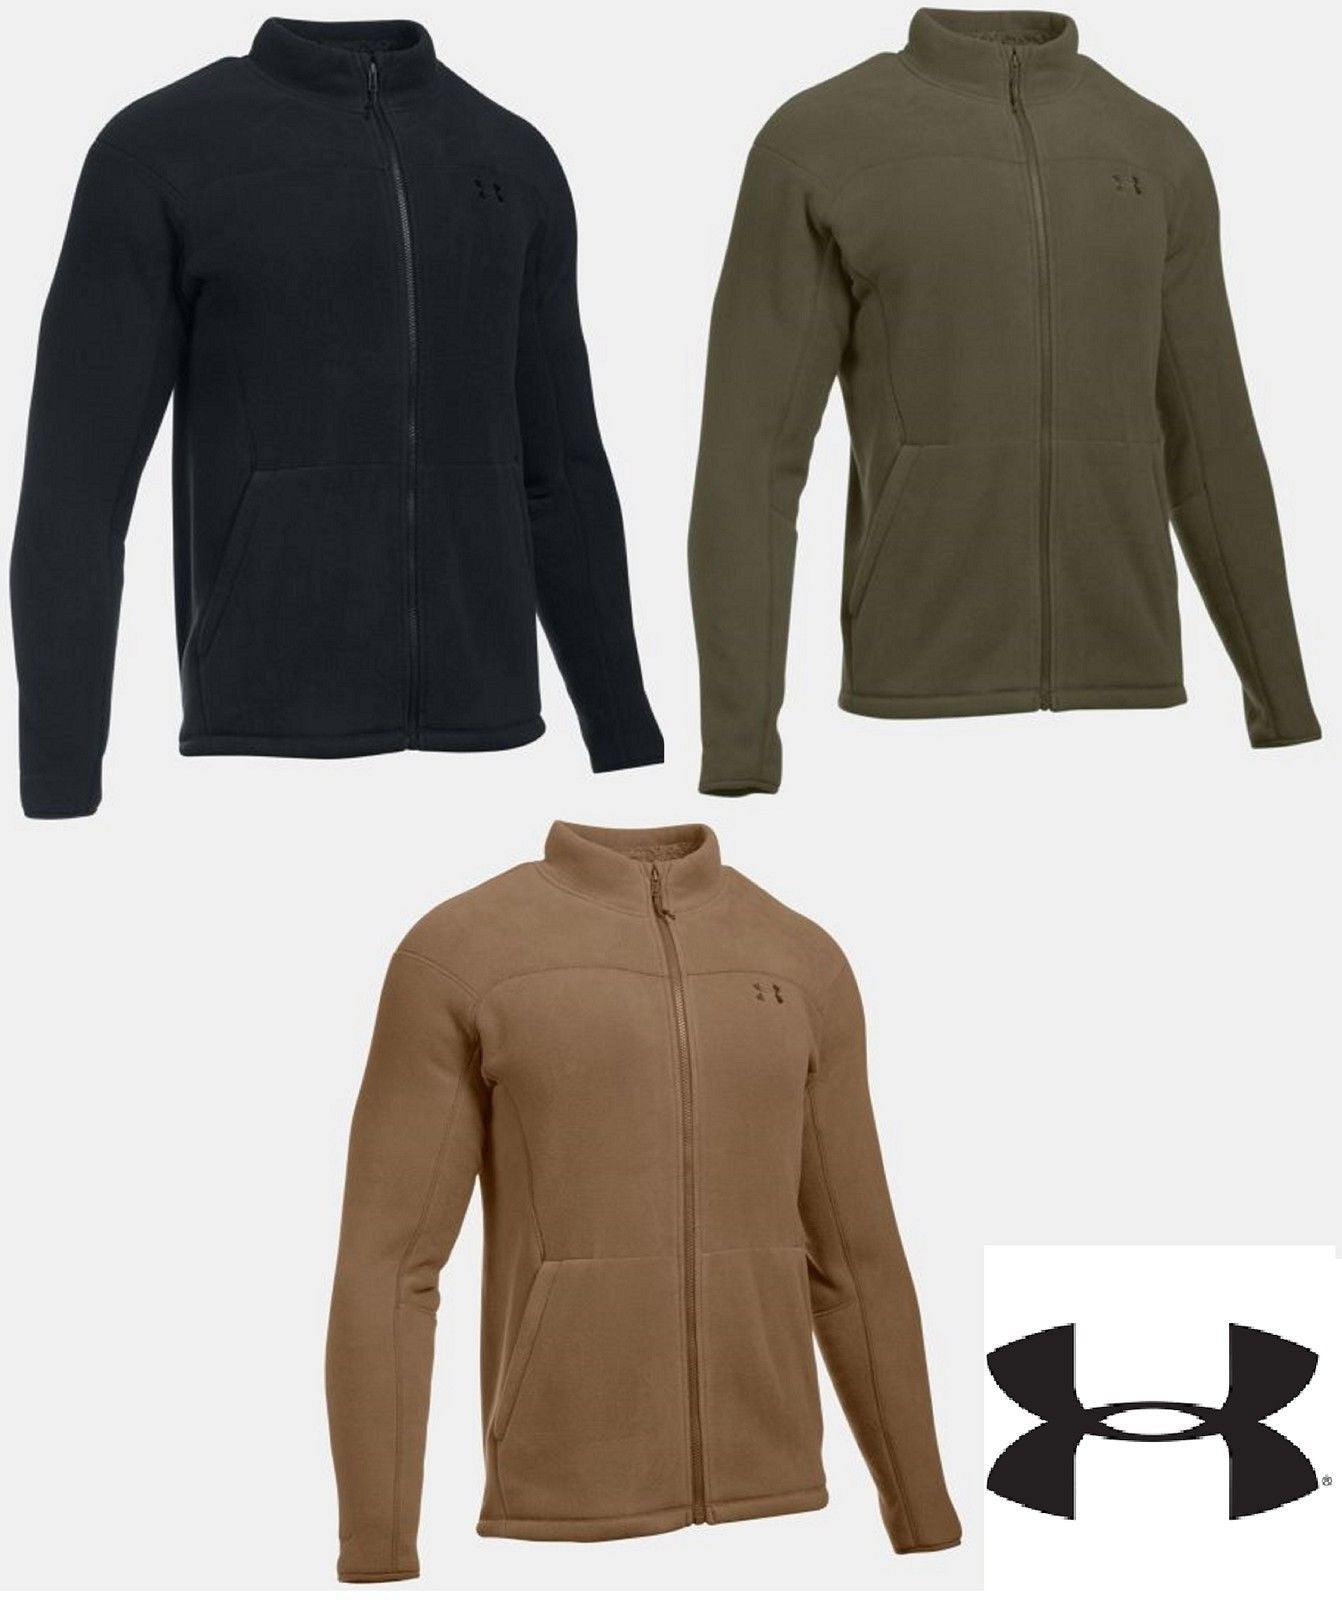 under armour sherpa jacket